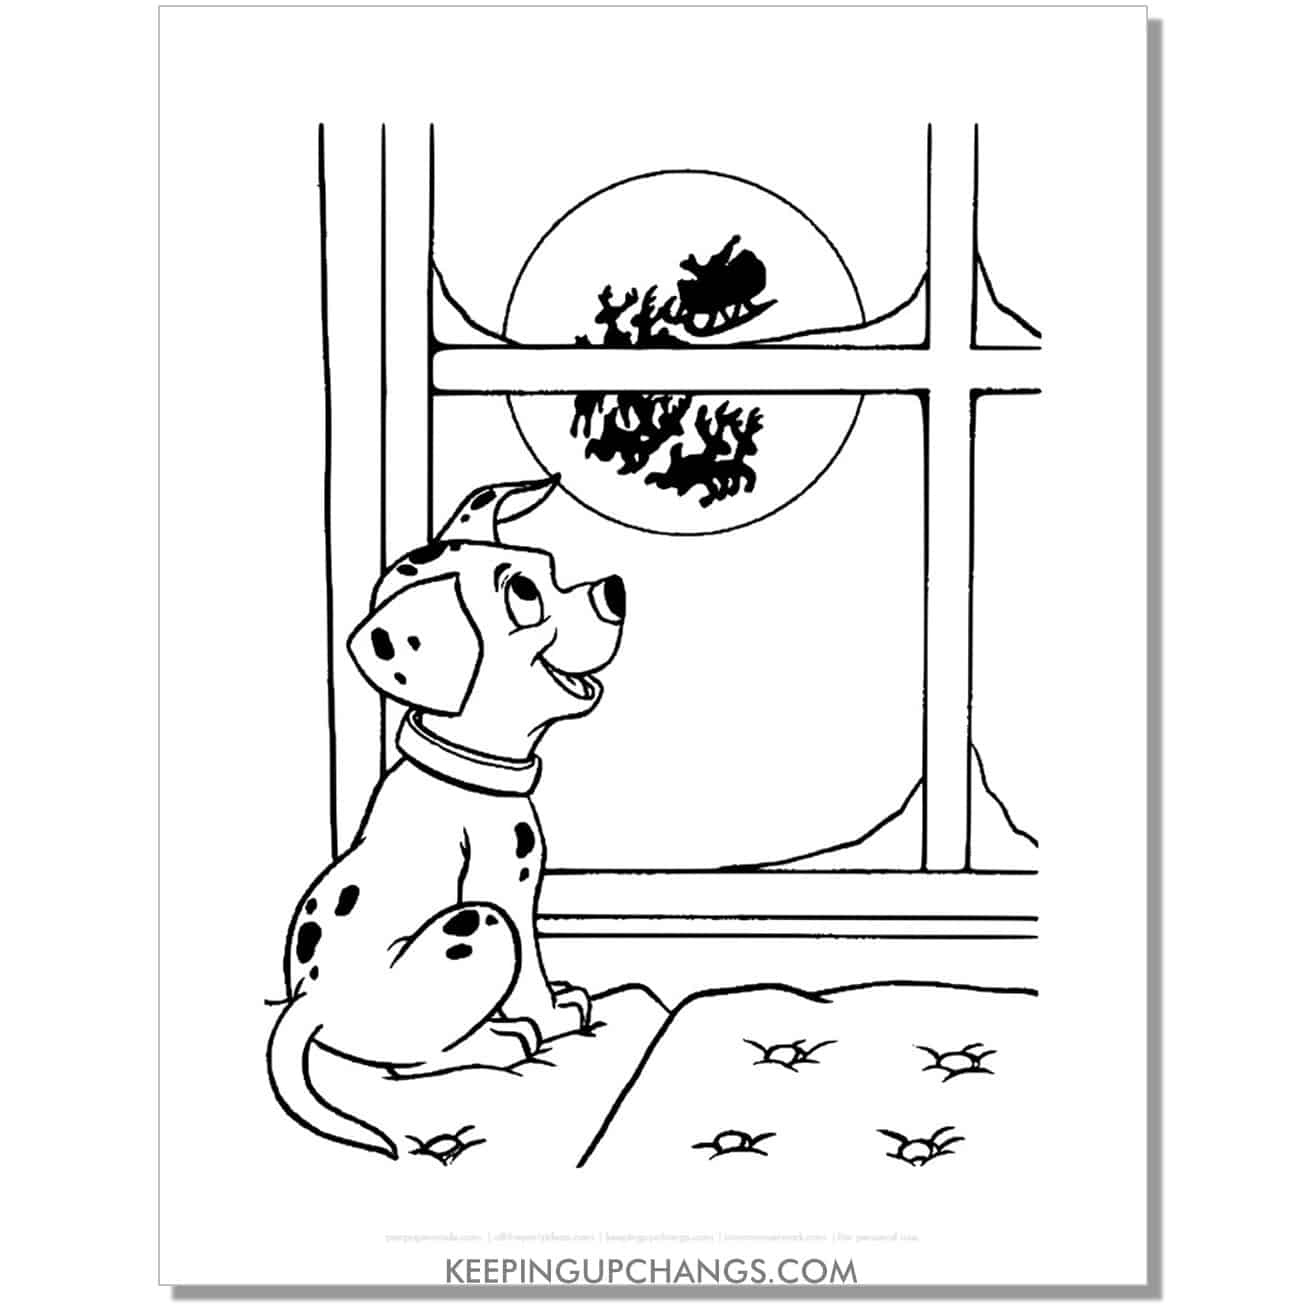 free pepper watching santa and reindeer at christmas 101 dalmations coloring page, sheet.